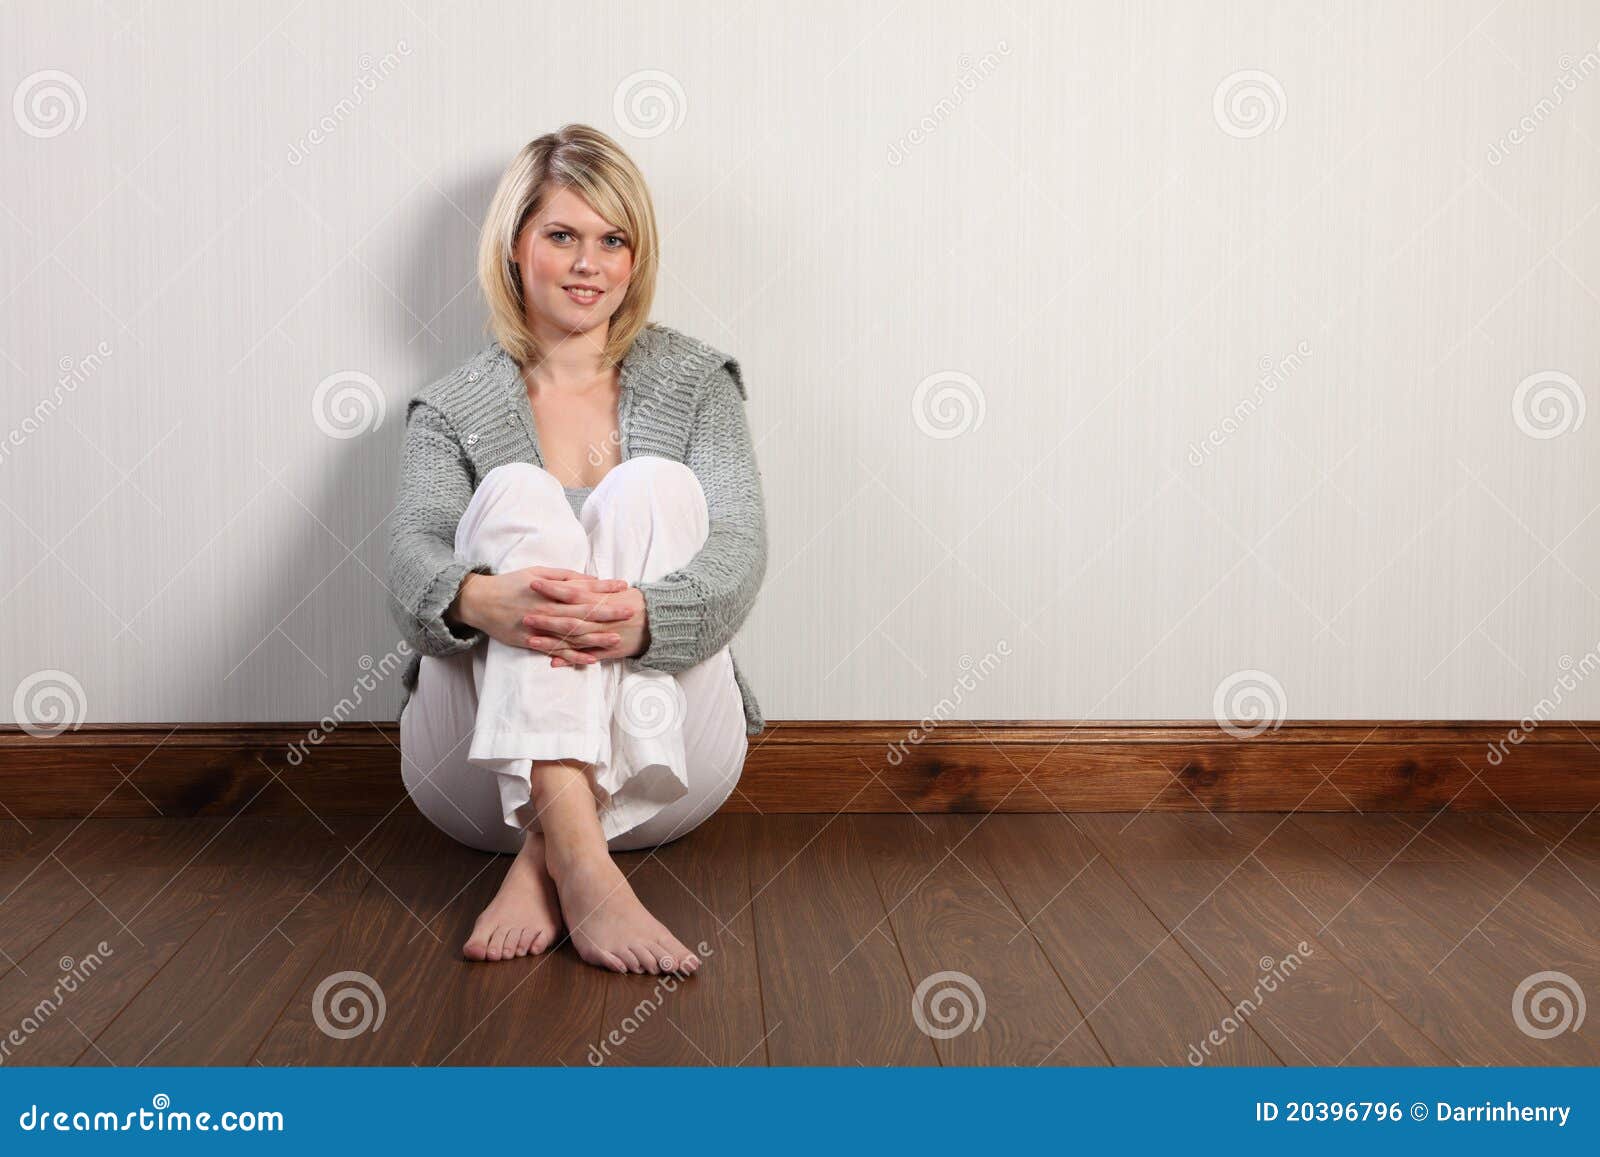 happy beautiful blonde woman in knitted cardigan